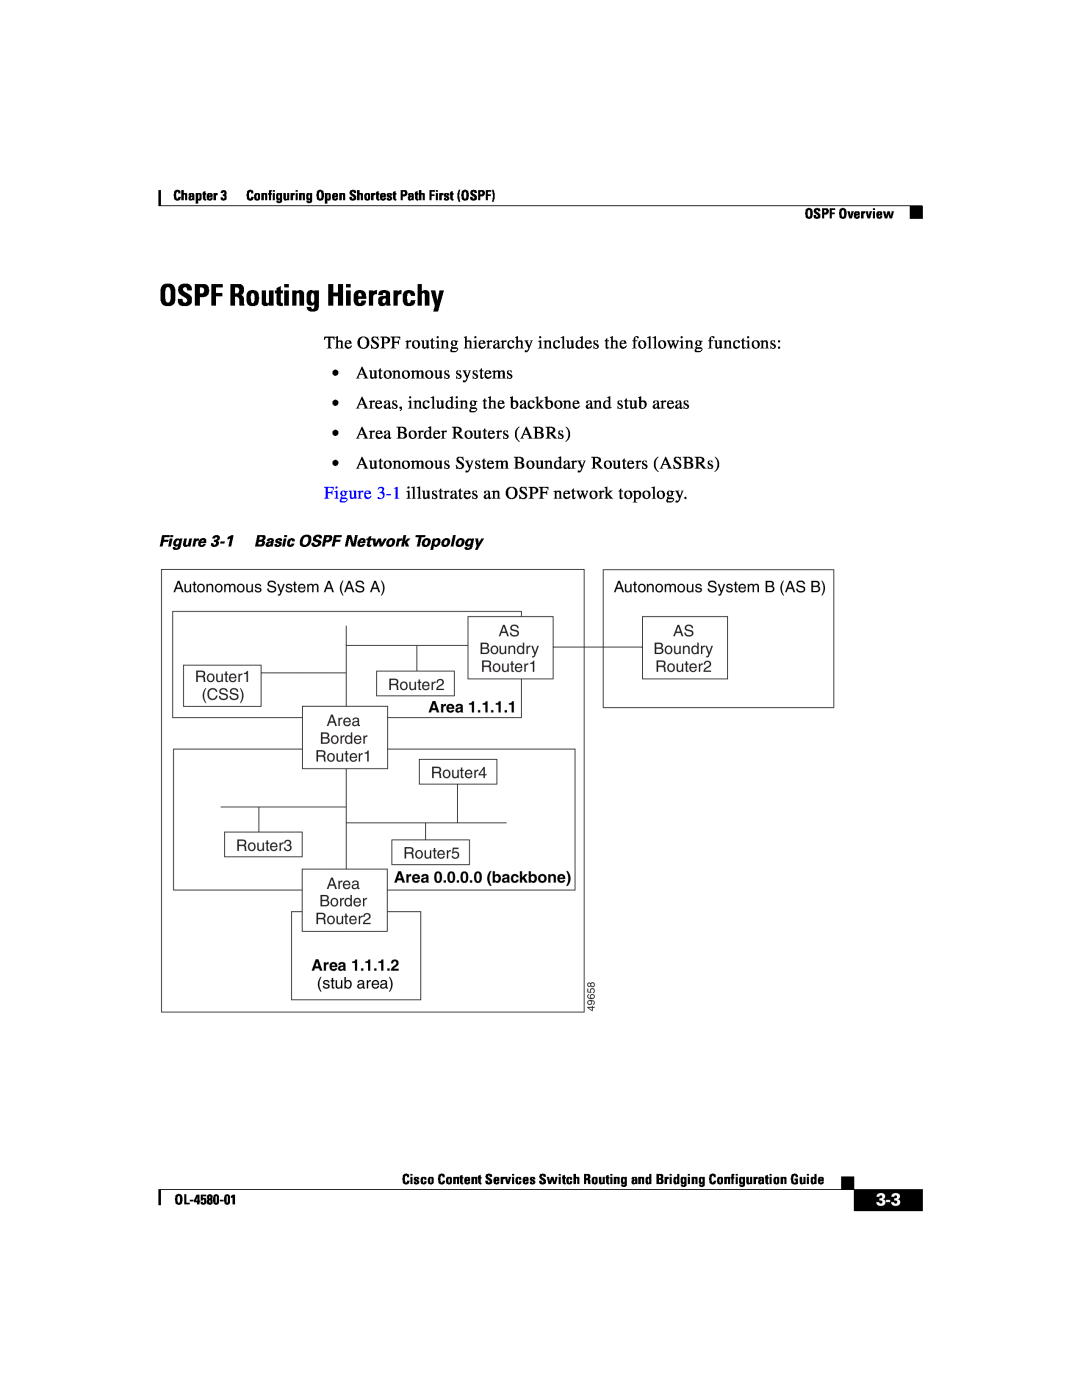 Cisco Systems OL-4580-01 manual OSPF Routing Hierarchy 